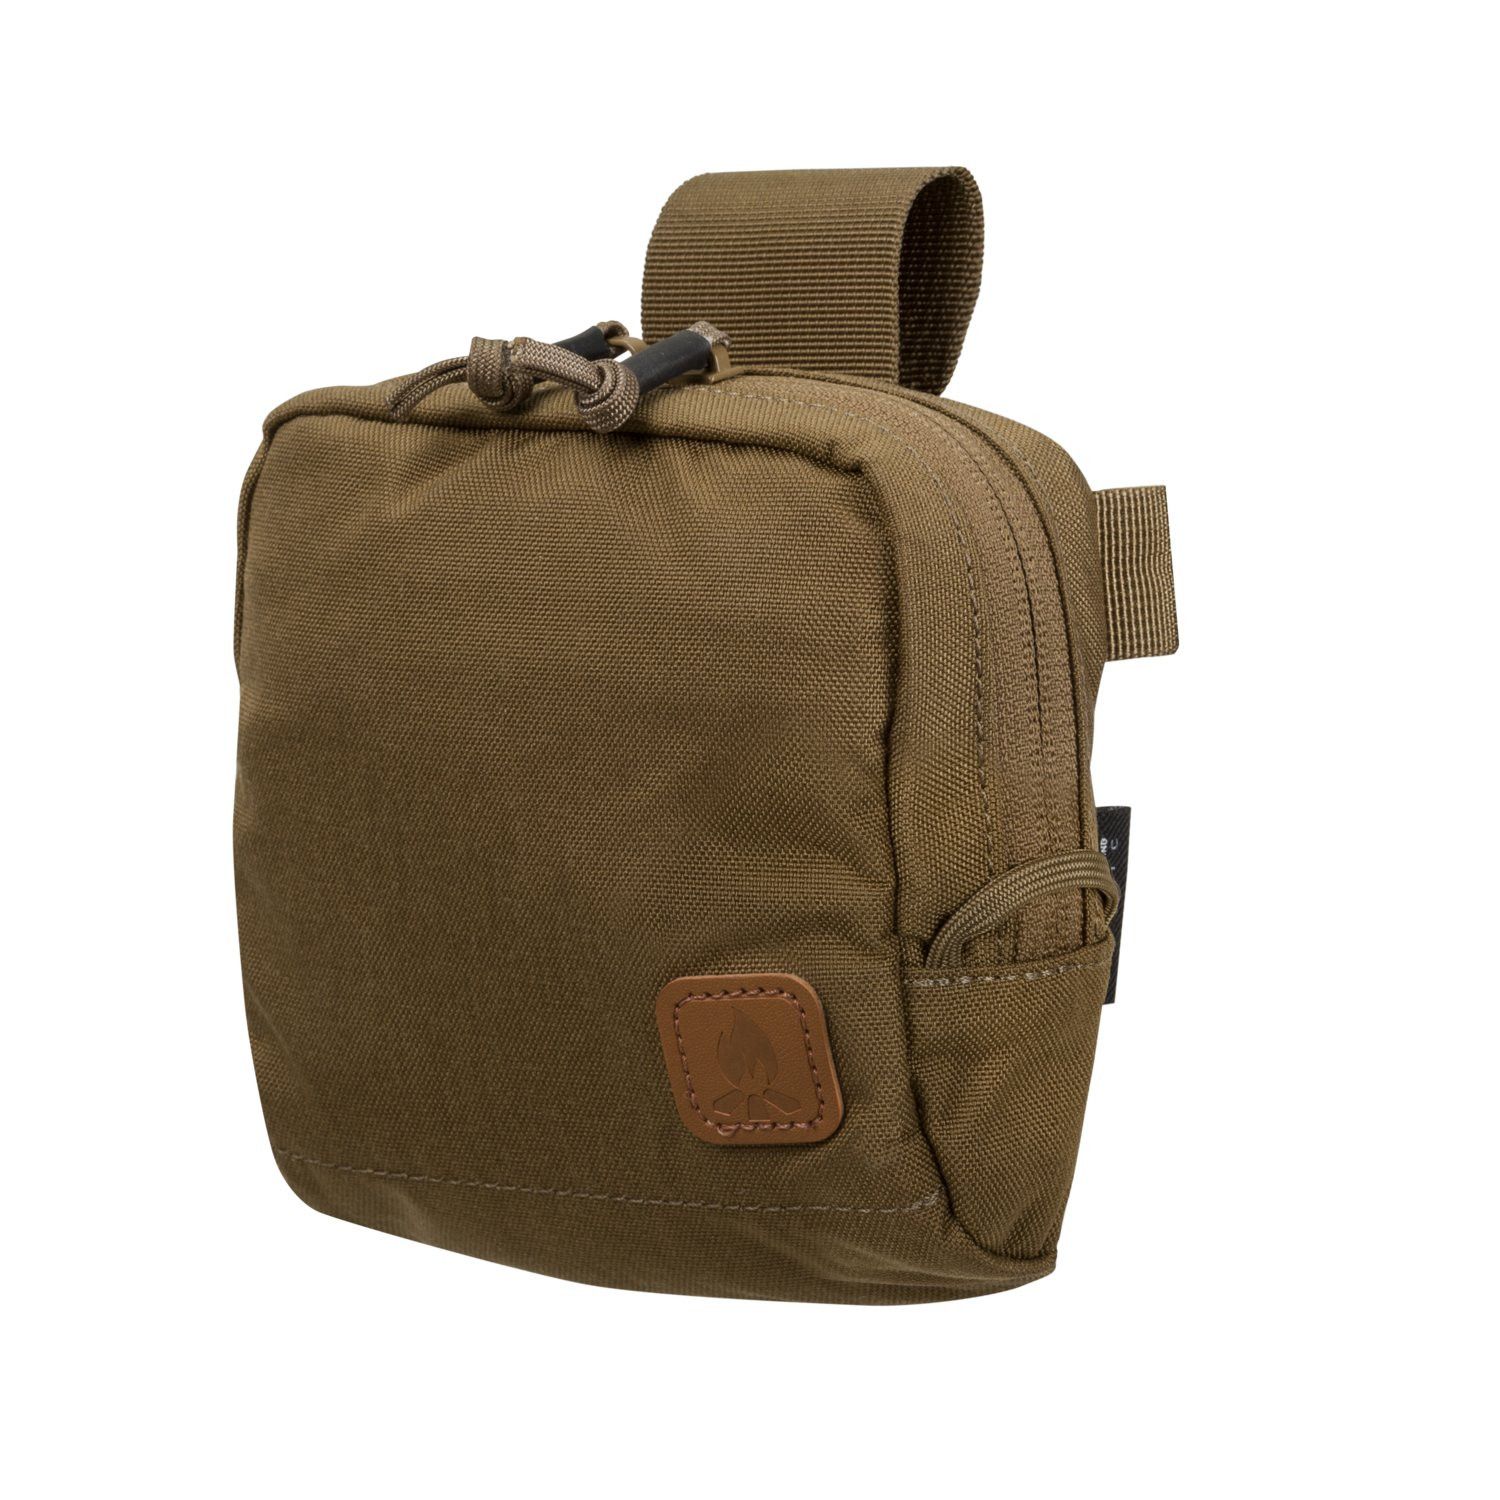 Helikon- Tex SERE Pouch - Coyote